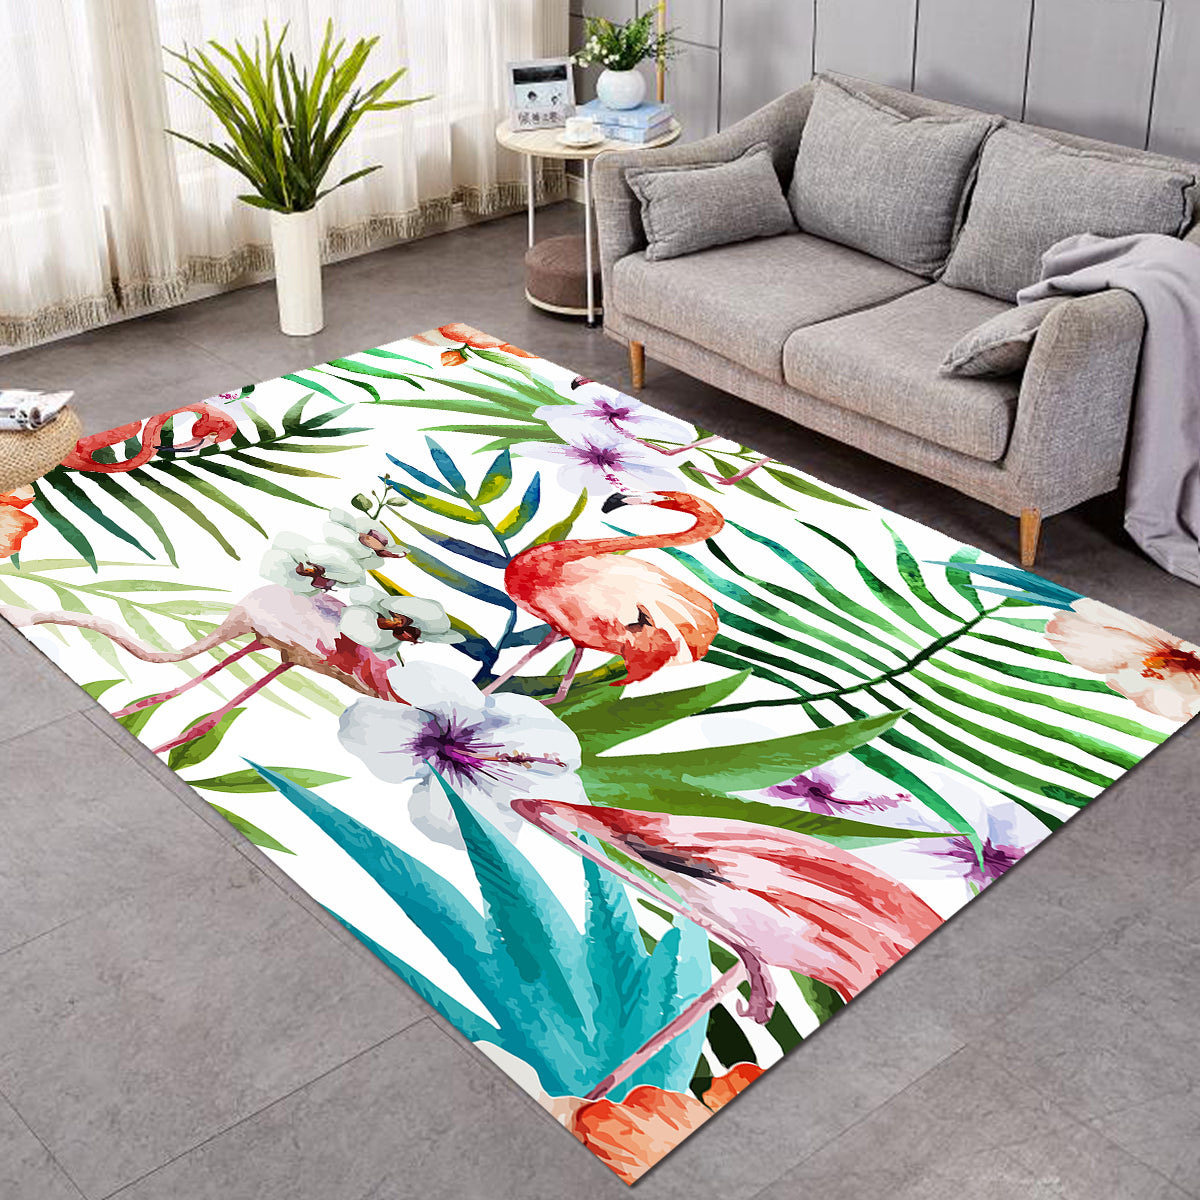 TROPICAL FLAMINGO HAND HOOKED AREA RUG - 7'6 ROUND - FREE SHIPPING*